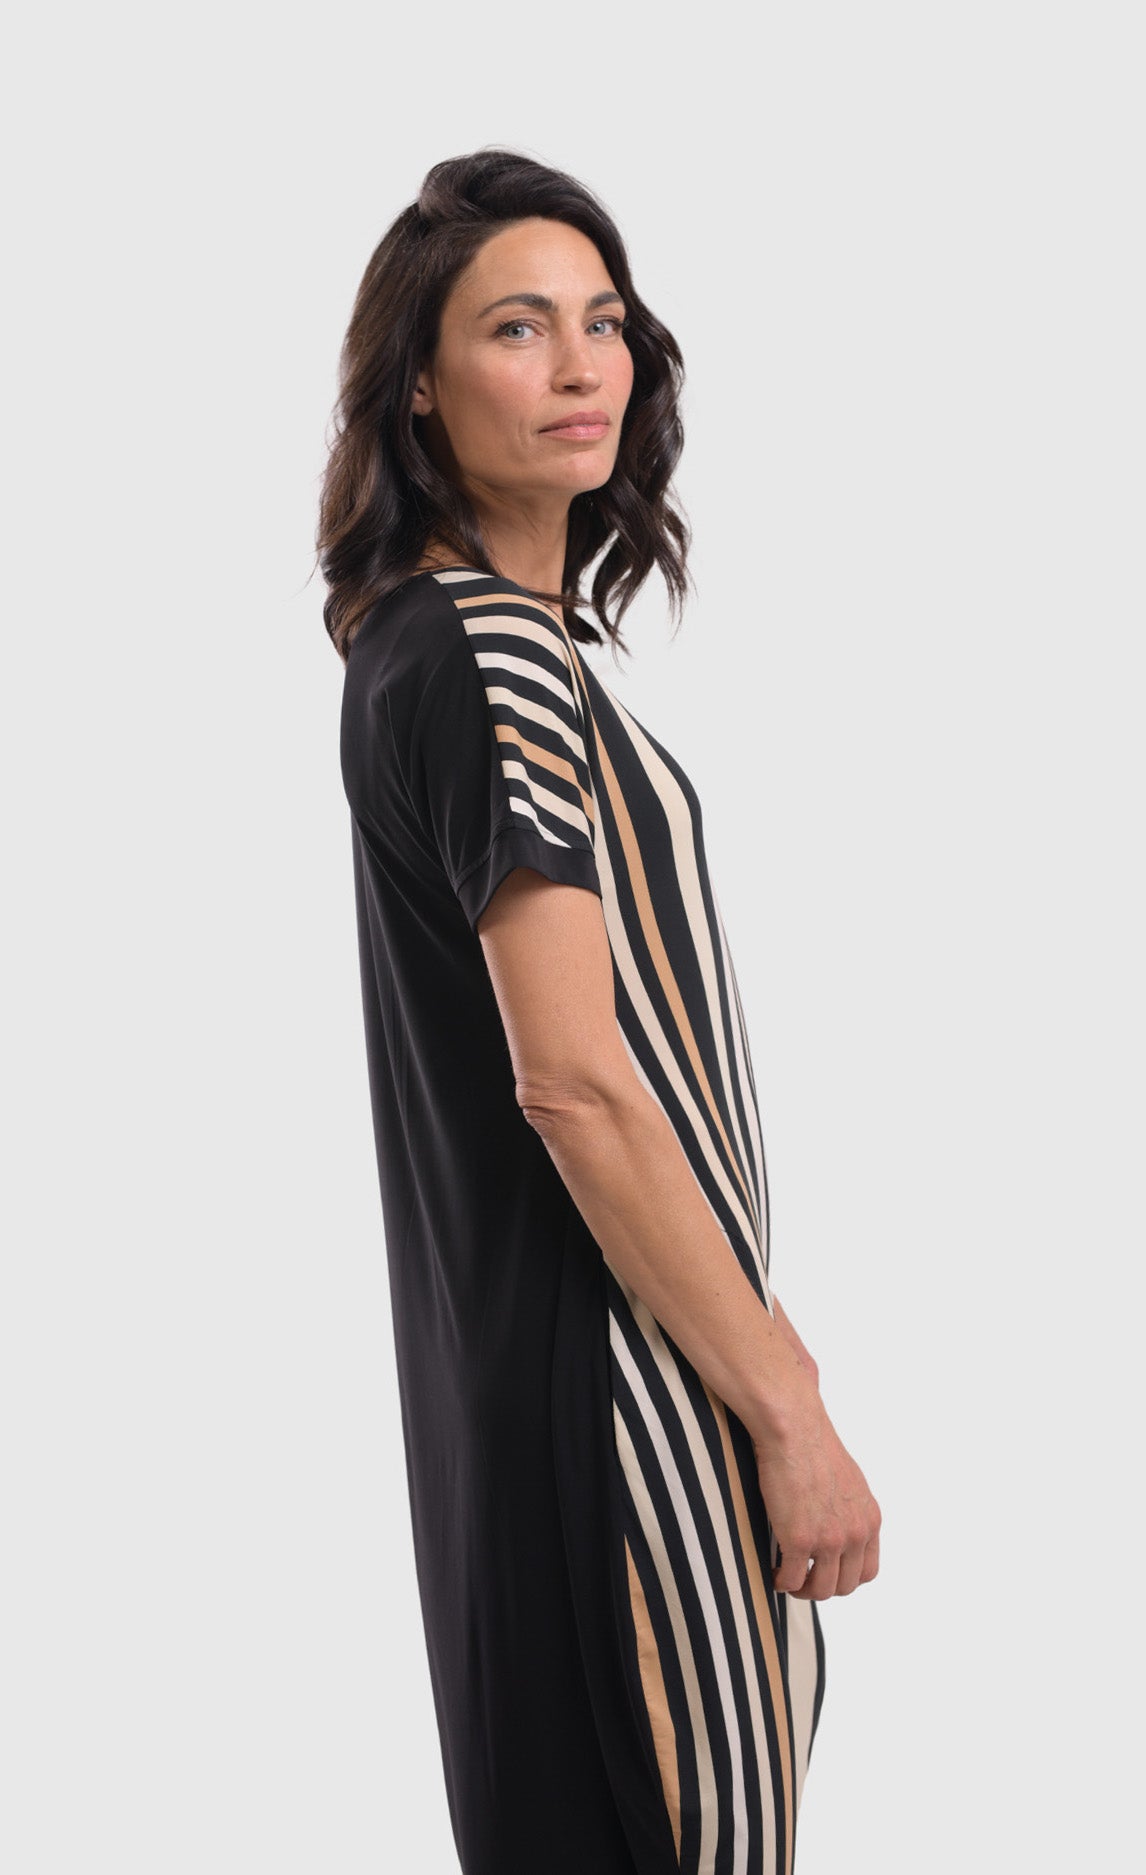 Right side top half view of a woman wearing the alembika sunrise stripe dress. This dress has black and white vertical stripes with a couple of tan stripes in between. The dress has short sleeves, a relaxed silhouette with a poof skirt, and two side pockets. The back of this dress is solid black.